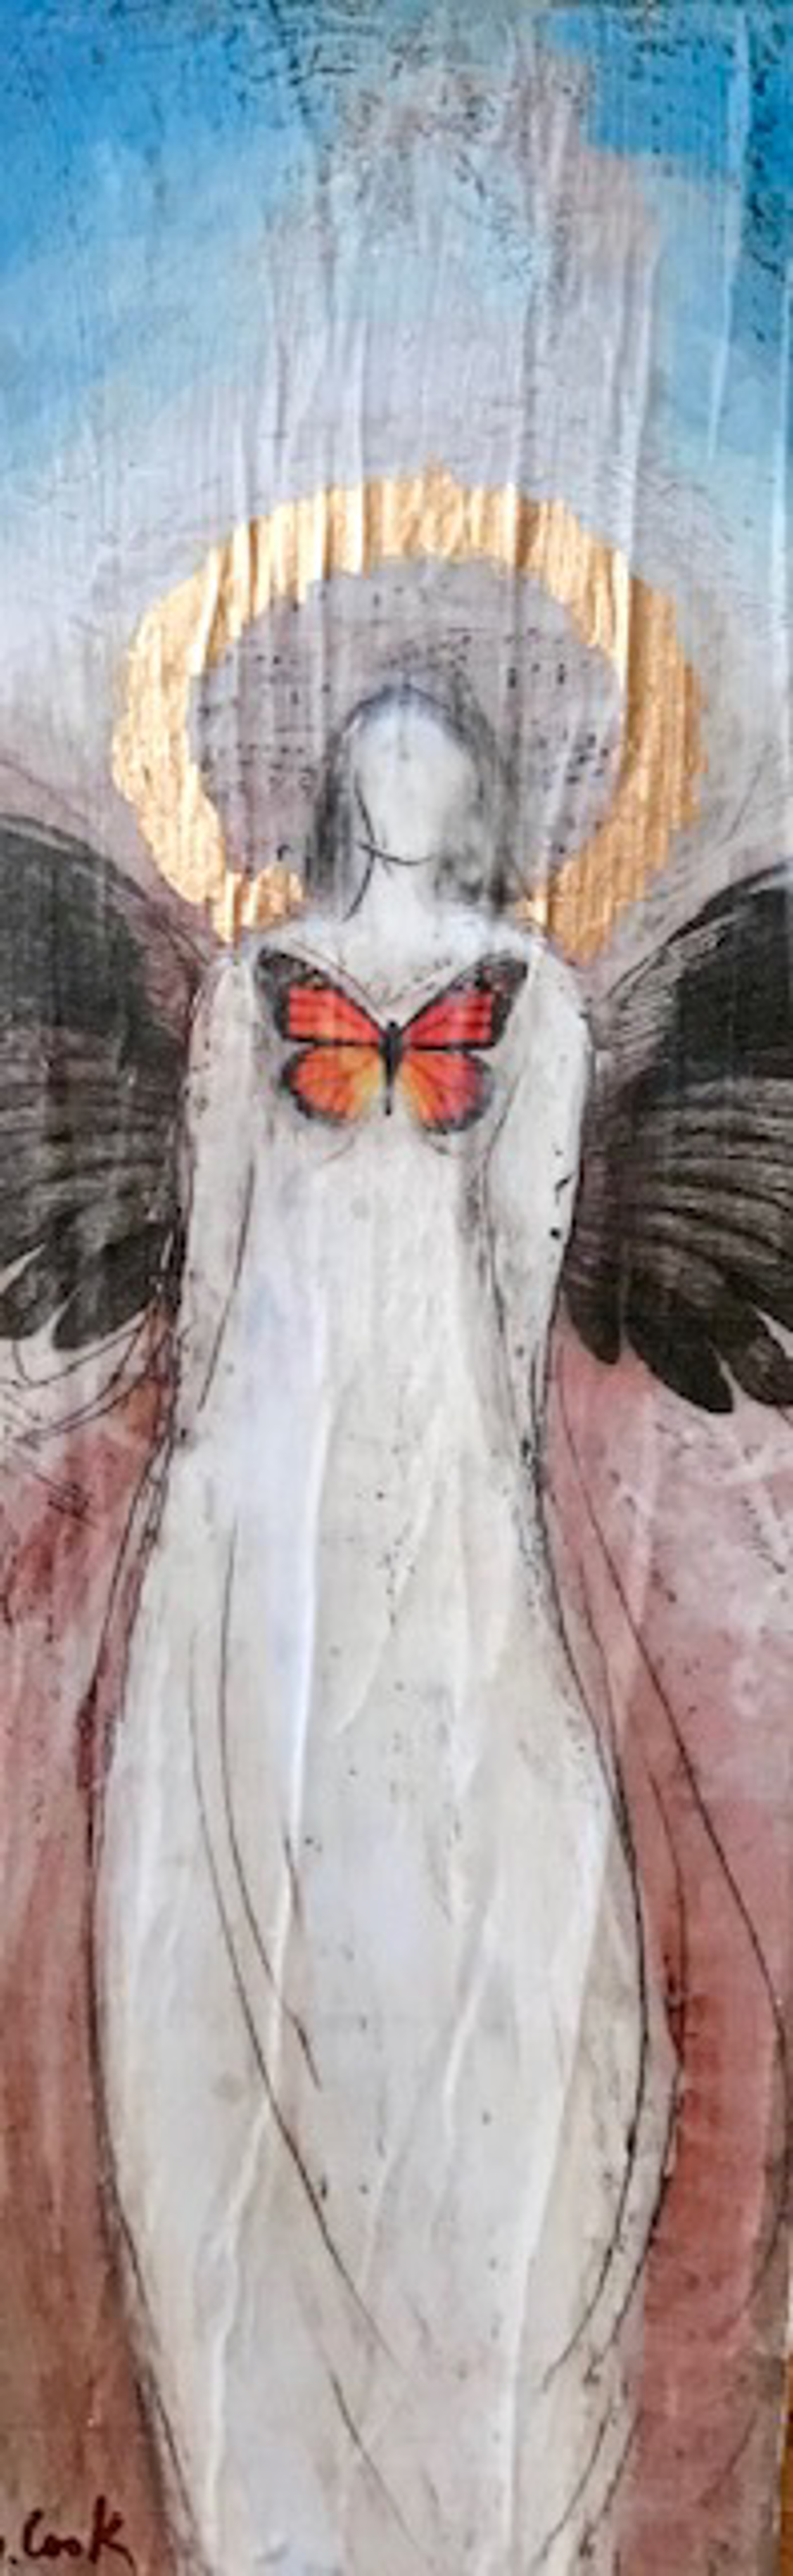 Monarch Angel by Sherry Cook